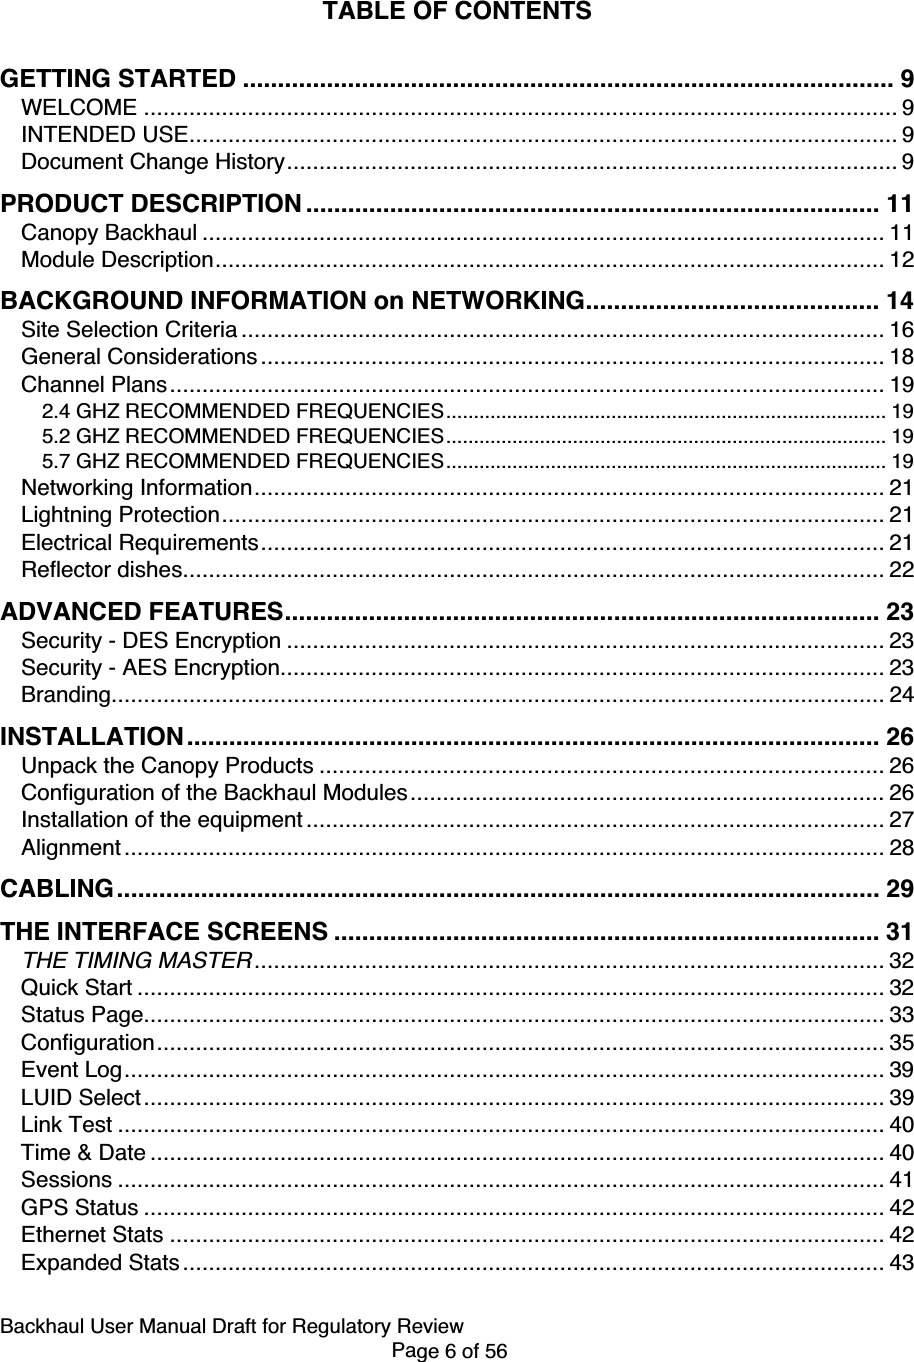 Backhaul User Manual Draft for Regulatory ReviewPage 6 of 56TABLE OF CONTENTSGETTING STARTED ............................................................................................. 9WELCOME .................................................................................................................... 9INTENDED USE............................................................................................................. 9Document Change History.............................................................................................. 9PRODUCT DESCRIPTION .................................................................................. 11Canopy Backhaul ......................................................................................................... 11Module Description....................................................................................................... 12BACKGROUND INFORMATION on NETWORKING.......................................... 14Site Selection Criteria ................................................................................................... 16General Considerations ................................................................................................ 18Channel Plans.............................................................................................................. 192.4 GHZ RECOMMENDED FREQUENCIES................................................................................ 195.2 GHZ RECOMMENDED FREQUENCIES................................................................................ 195.7 GHZ RECOMMENDED FREQUENCIES................................................................................ 19Networking Information................................................................................................. 21Lightning Protection...................................................................................................... 21Electrical Requirements................................................................................................ 21Reflector dishes............................................................................................................ 22ADVANCED FEATURES..................................................................................... 23Security - DES Encryption ............................................................................................ 23Security - AES Encryption............................................................................................. 23Branding....................................................................................................................... 24INSTALLATION ................................................................................................... 26Unpack the Canopy Products ....................................................................................... 26Configuration of the Backhaul Modules......................................................................... 26Installation of the equipment ......................................................................................... 27Alignment ..................................................................................................................... 28CABLING............................................................................................................. 29THE INTERFACE SCREENS .............................................................................. 31THE TIMING MASTER................................................................................................. 32Quick Start ................................................................................................................... 32Status Page.................................................................................................................. 33Configuration................................................................................................................ 35Event Log..................................................................................................................... 39LUID Select.................................................................................................................. 39Link Test ...................................................................................................................... 40Time &amp; Date ................................................................................................................. 40Sessions ...................................................................................................................... 41GPS Status .................................................................................................................. 42Ethernet Stats .............................................................................................................. 42Expanded Stats............................................................................................................ 43